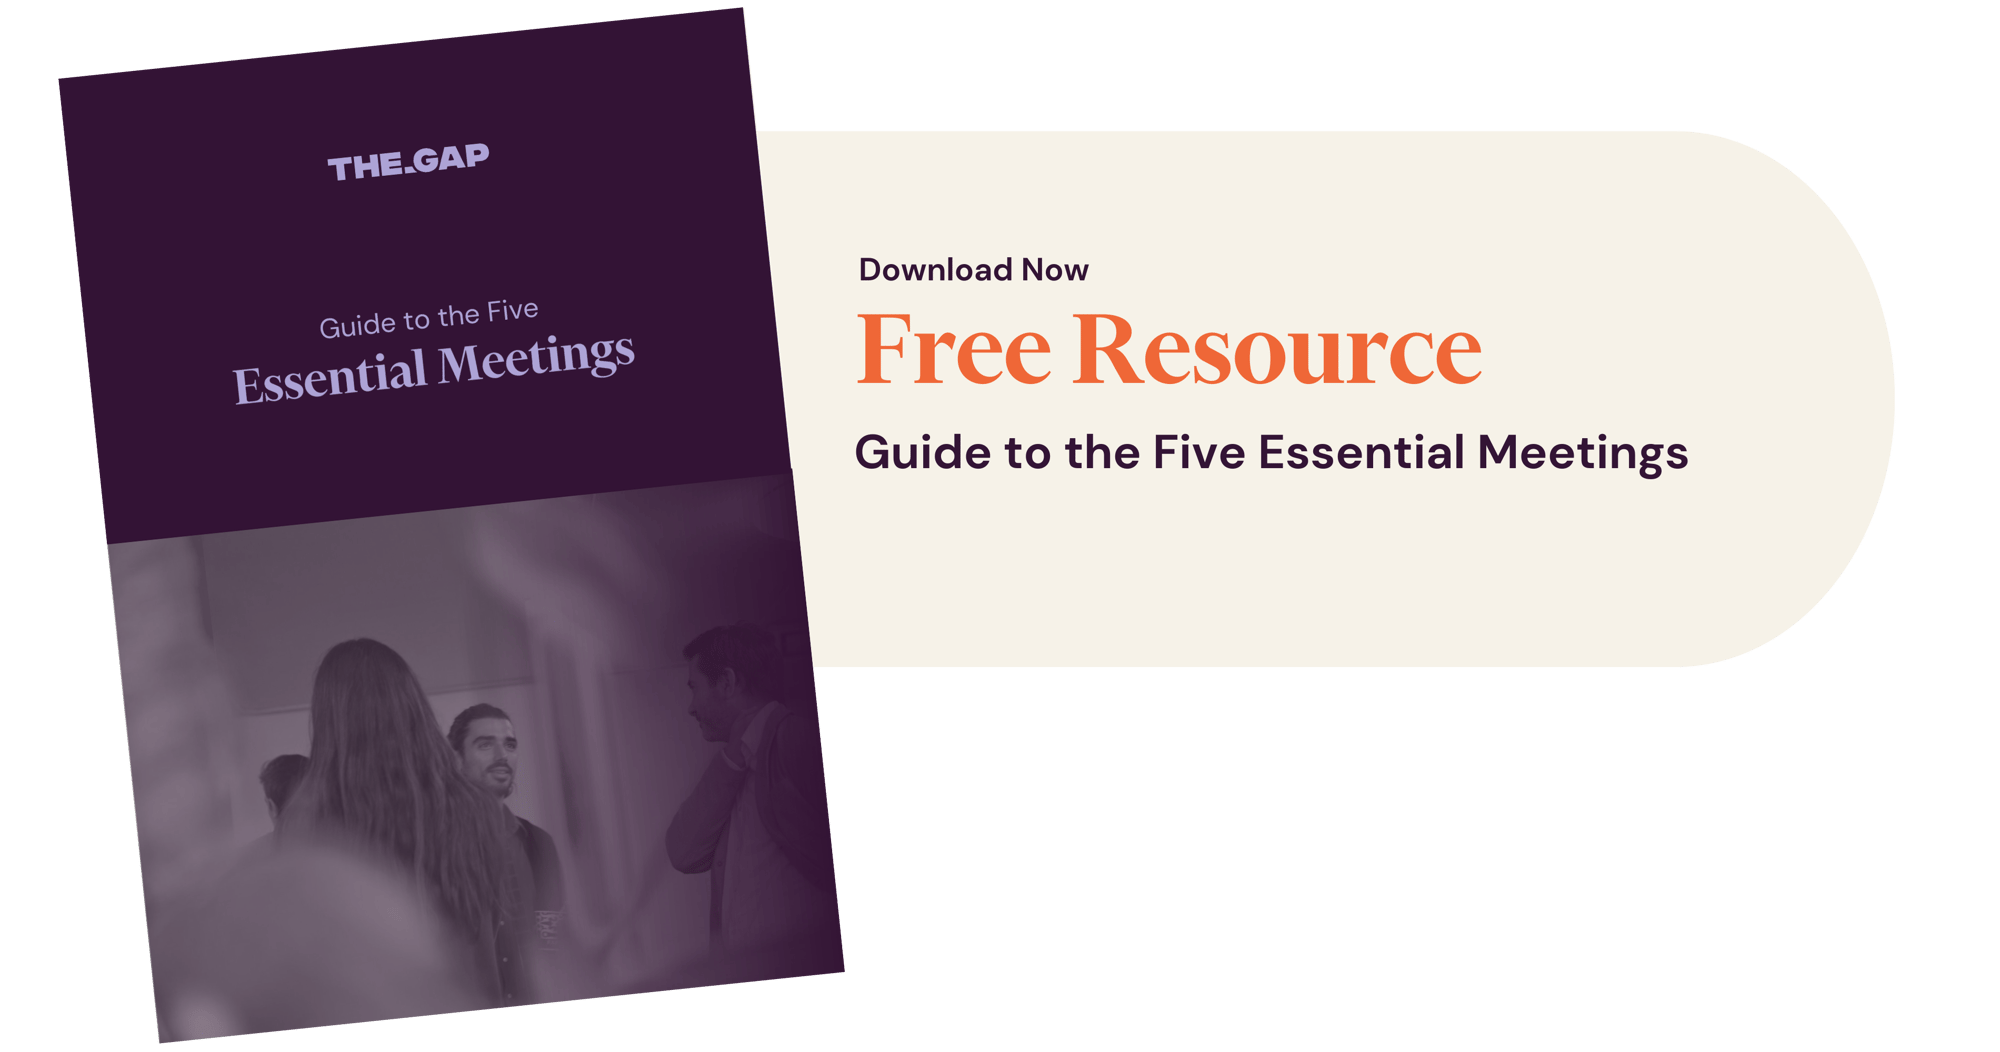 Download Banner - Guide to the Five Essential Meetings